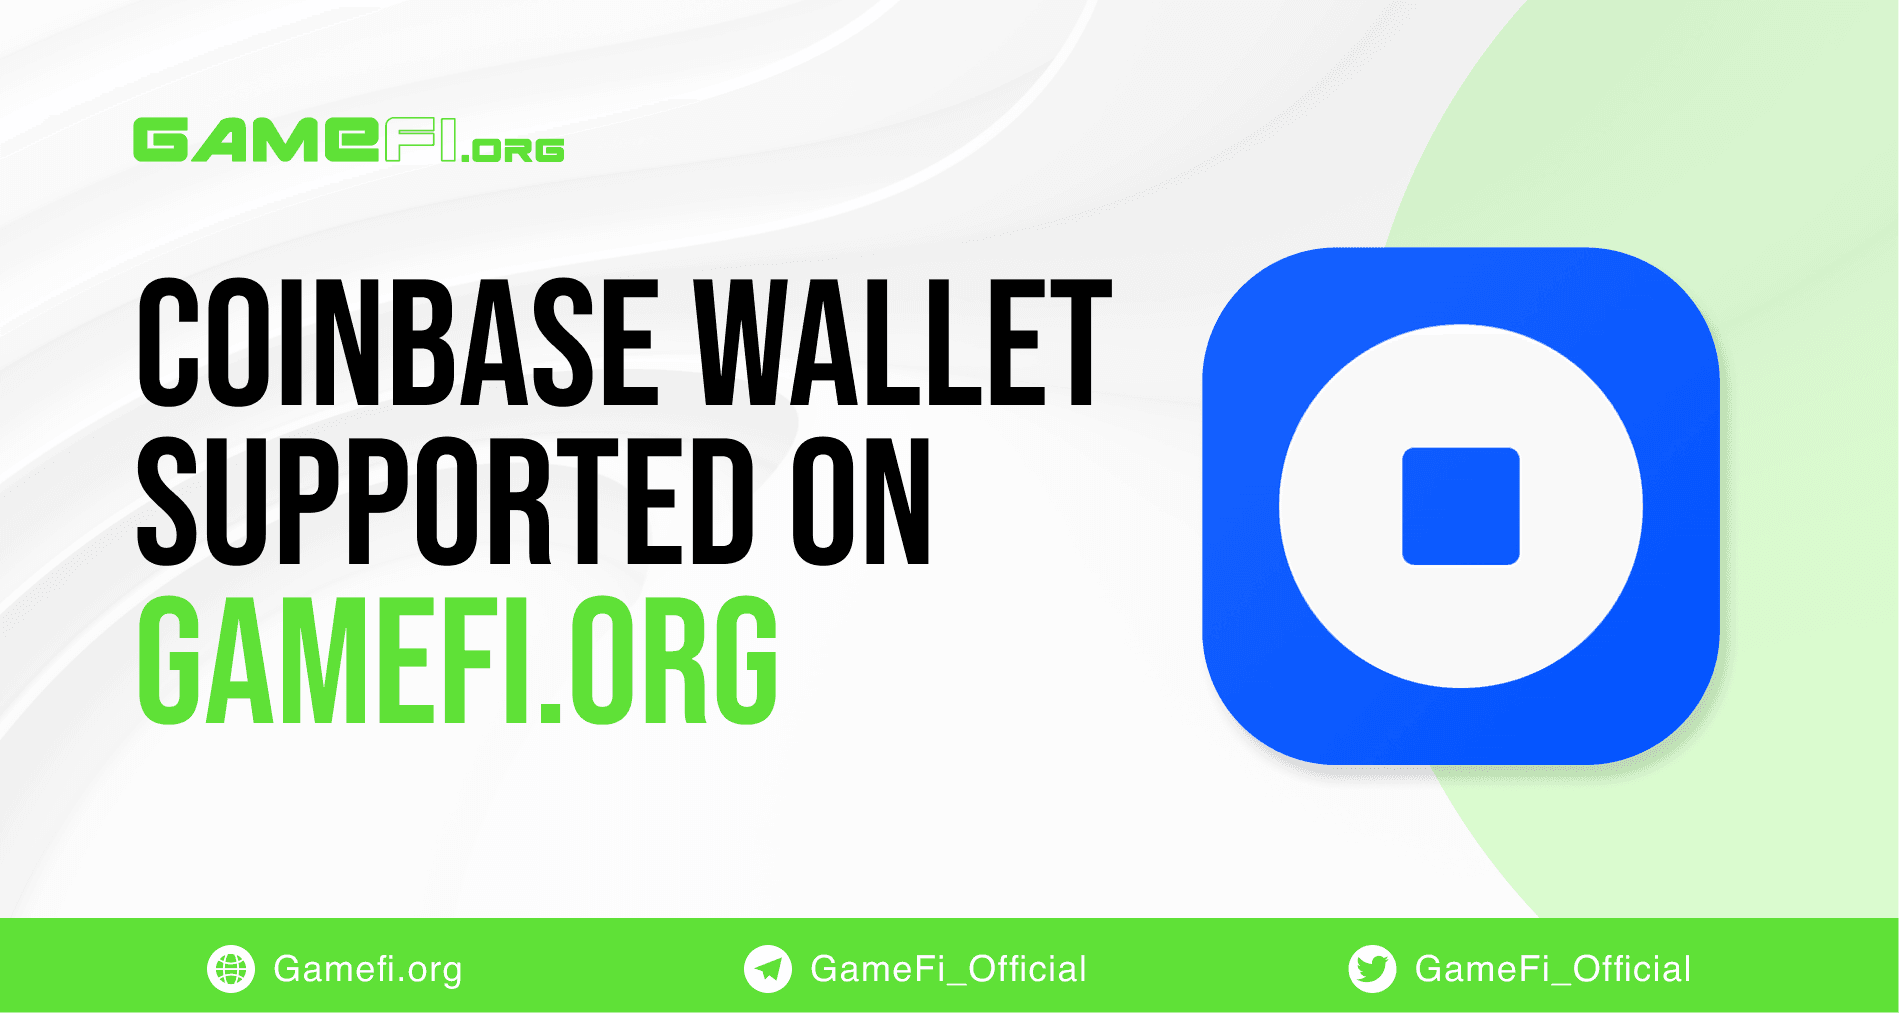 Coinbase Wallet Supported on GameFi.org - Where User Experience is No Longer Limited